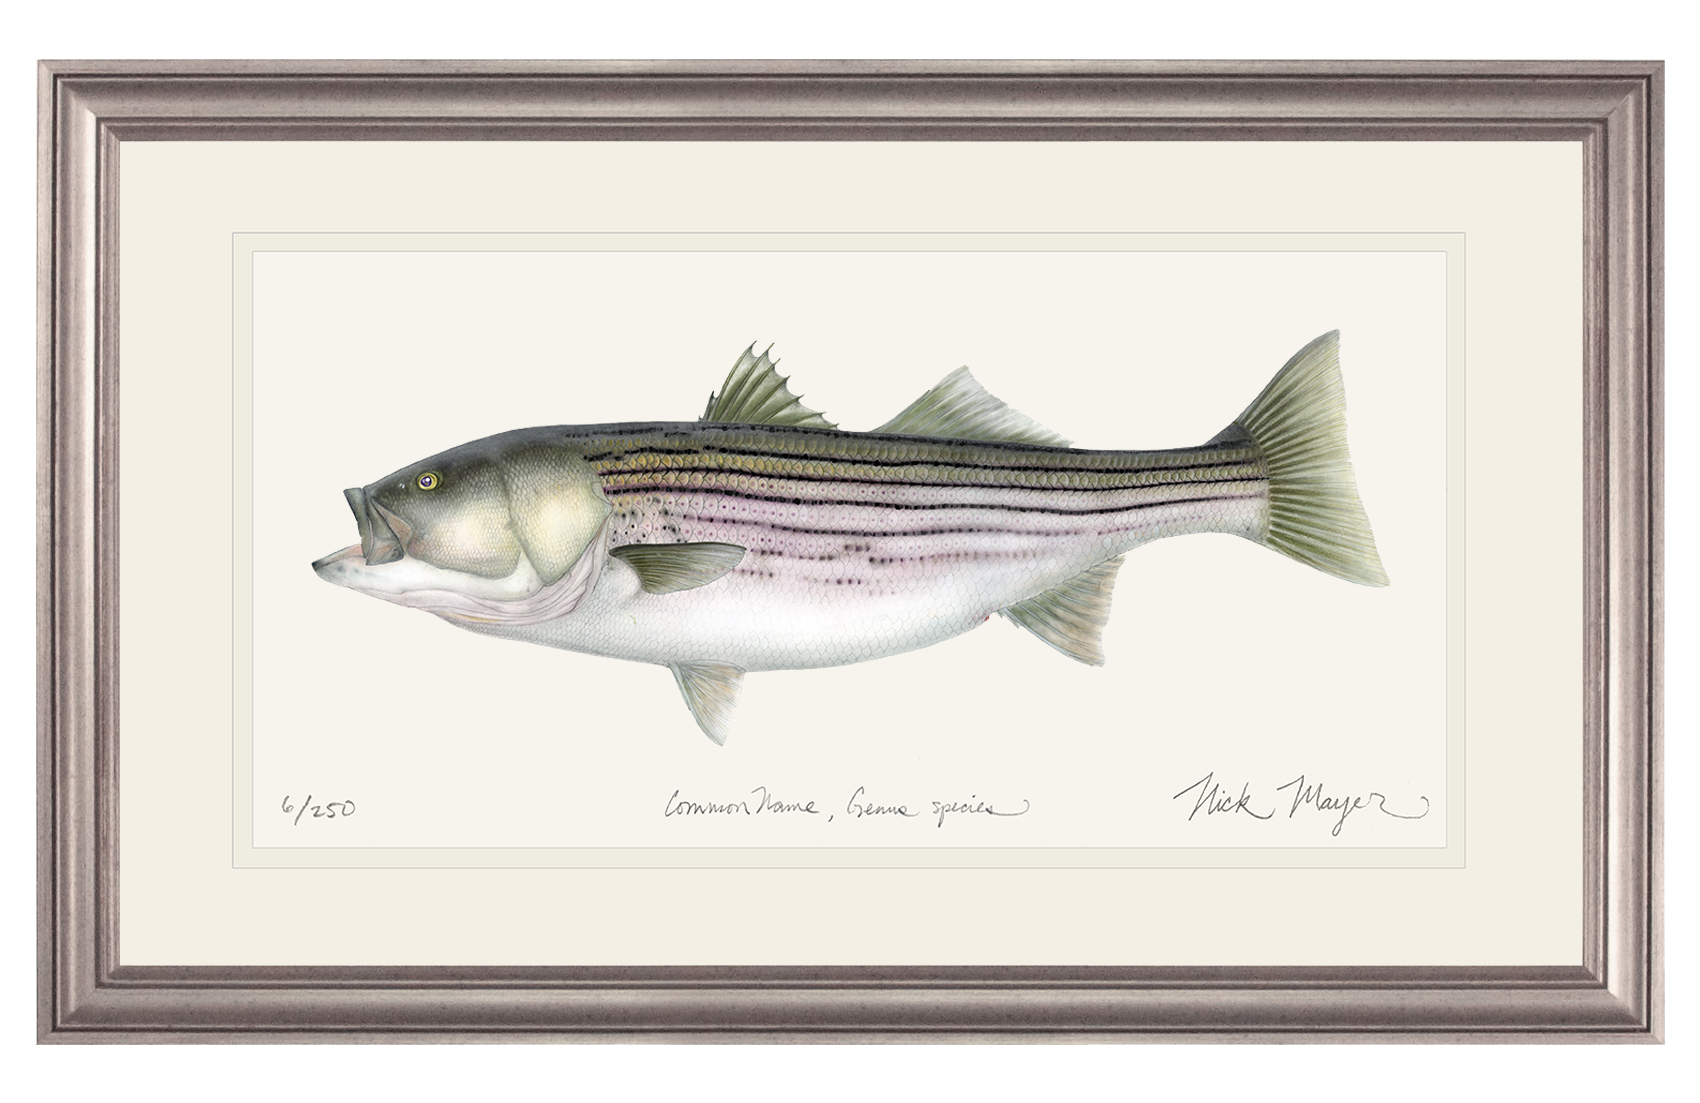 Stripers Wall Art for Sale